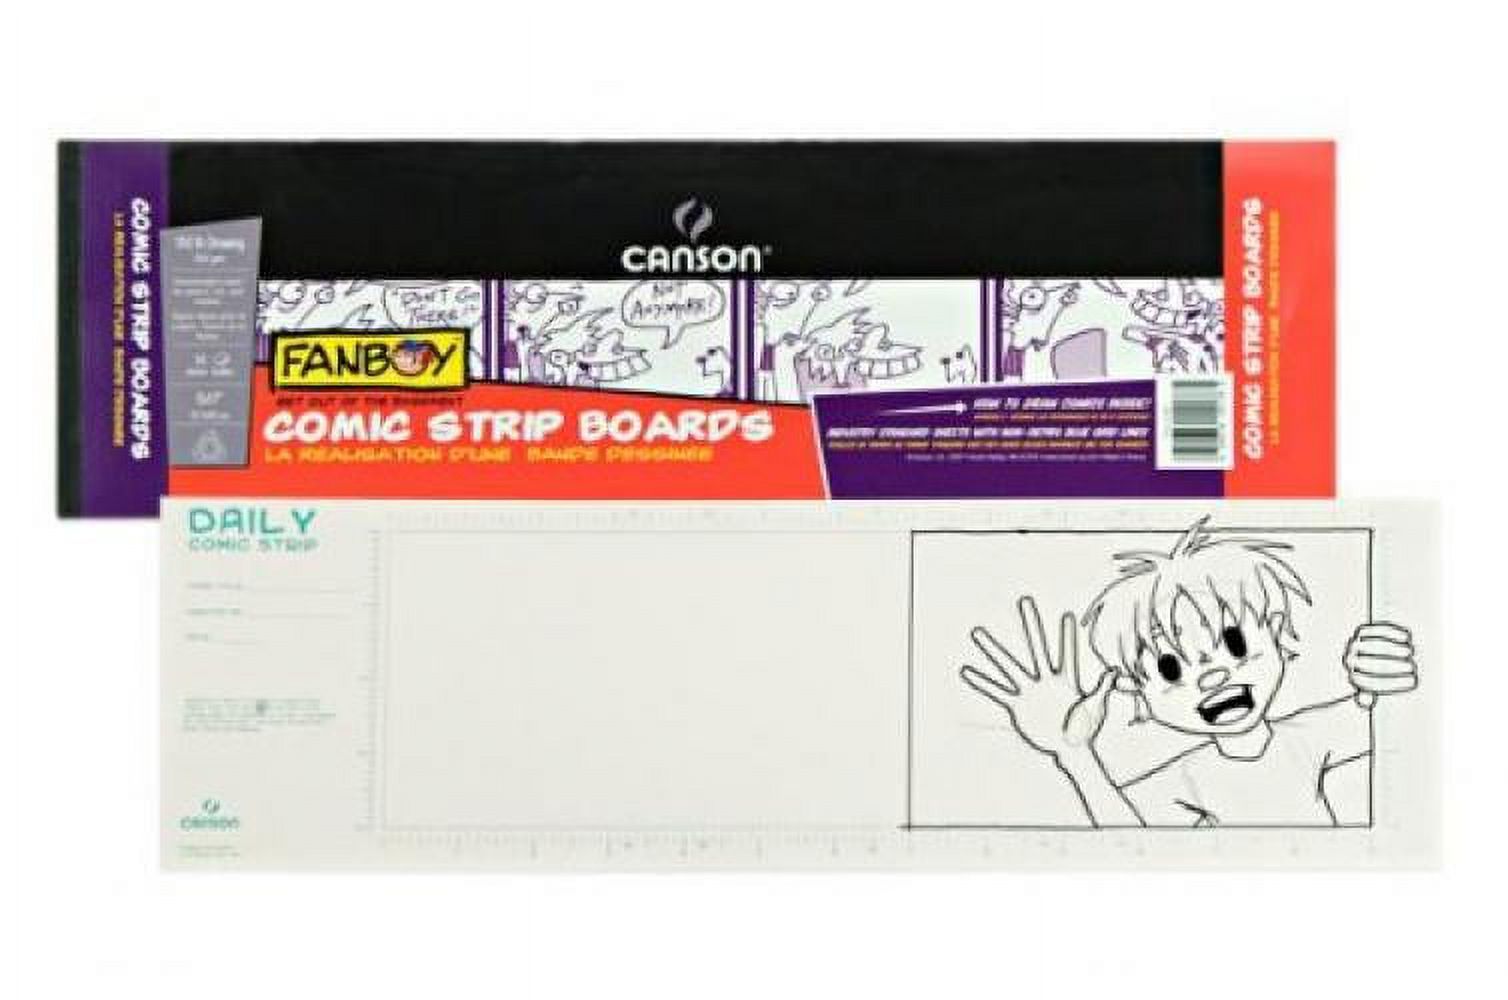 Canson Fanboy Comic Strip Boards - 5 x 17, 14 Sheets 